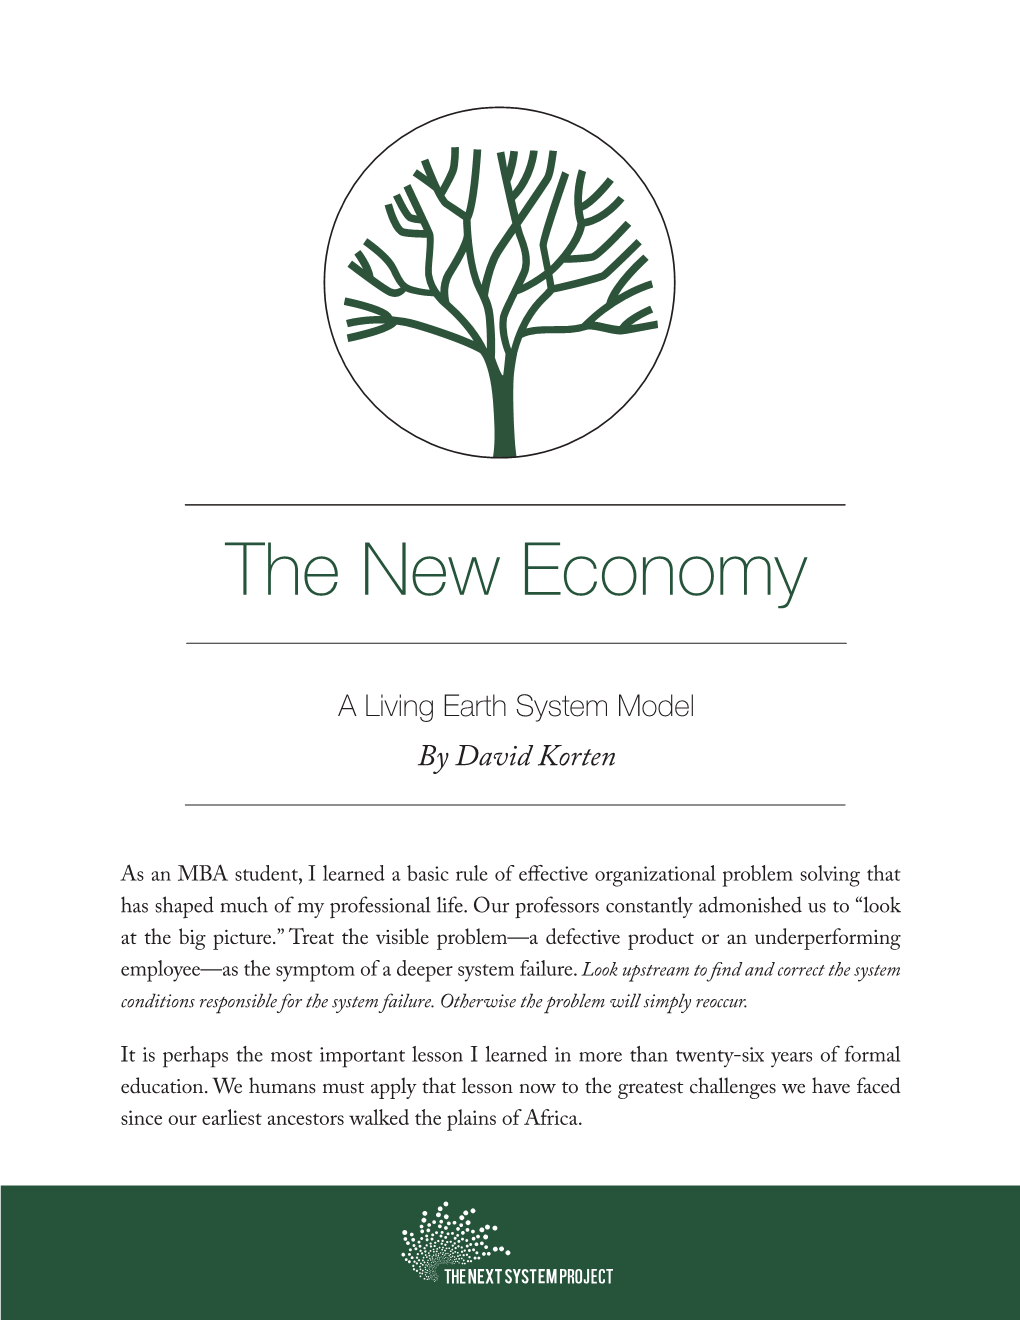 The New Economy: a Living Earth System Model